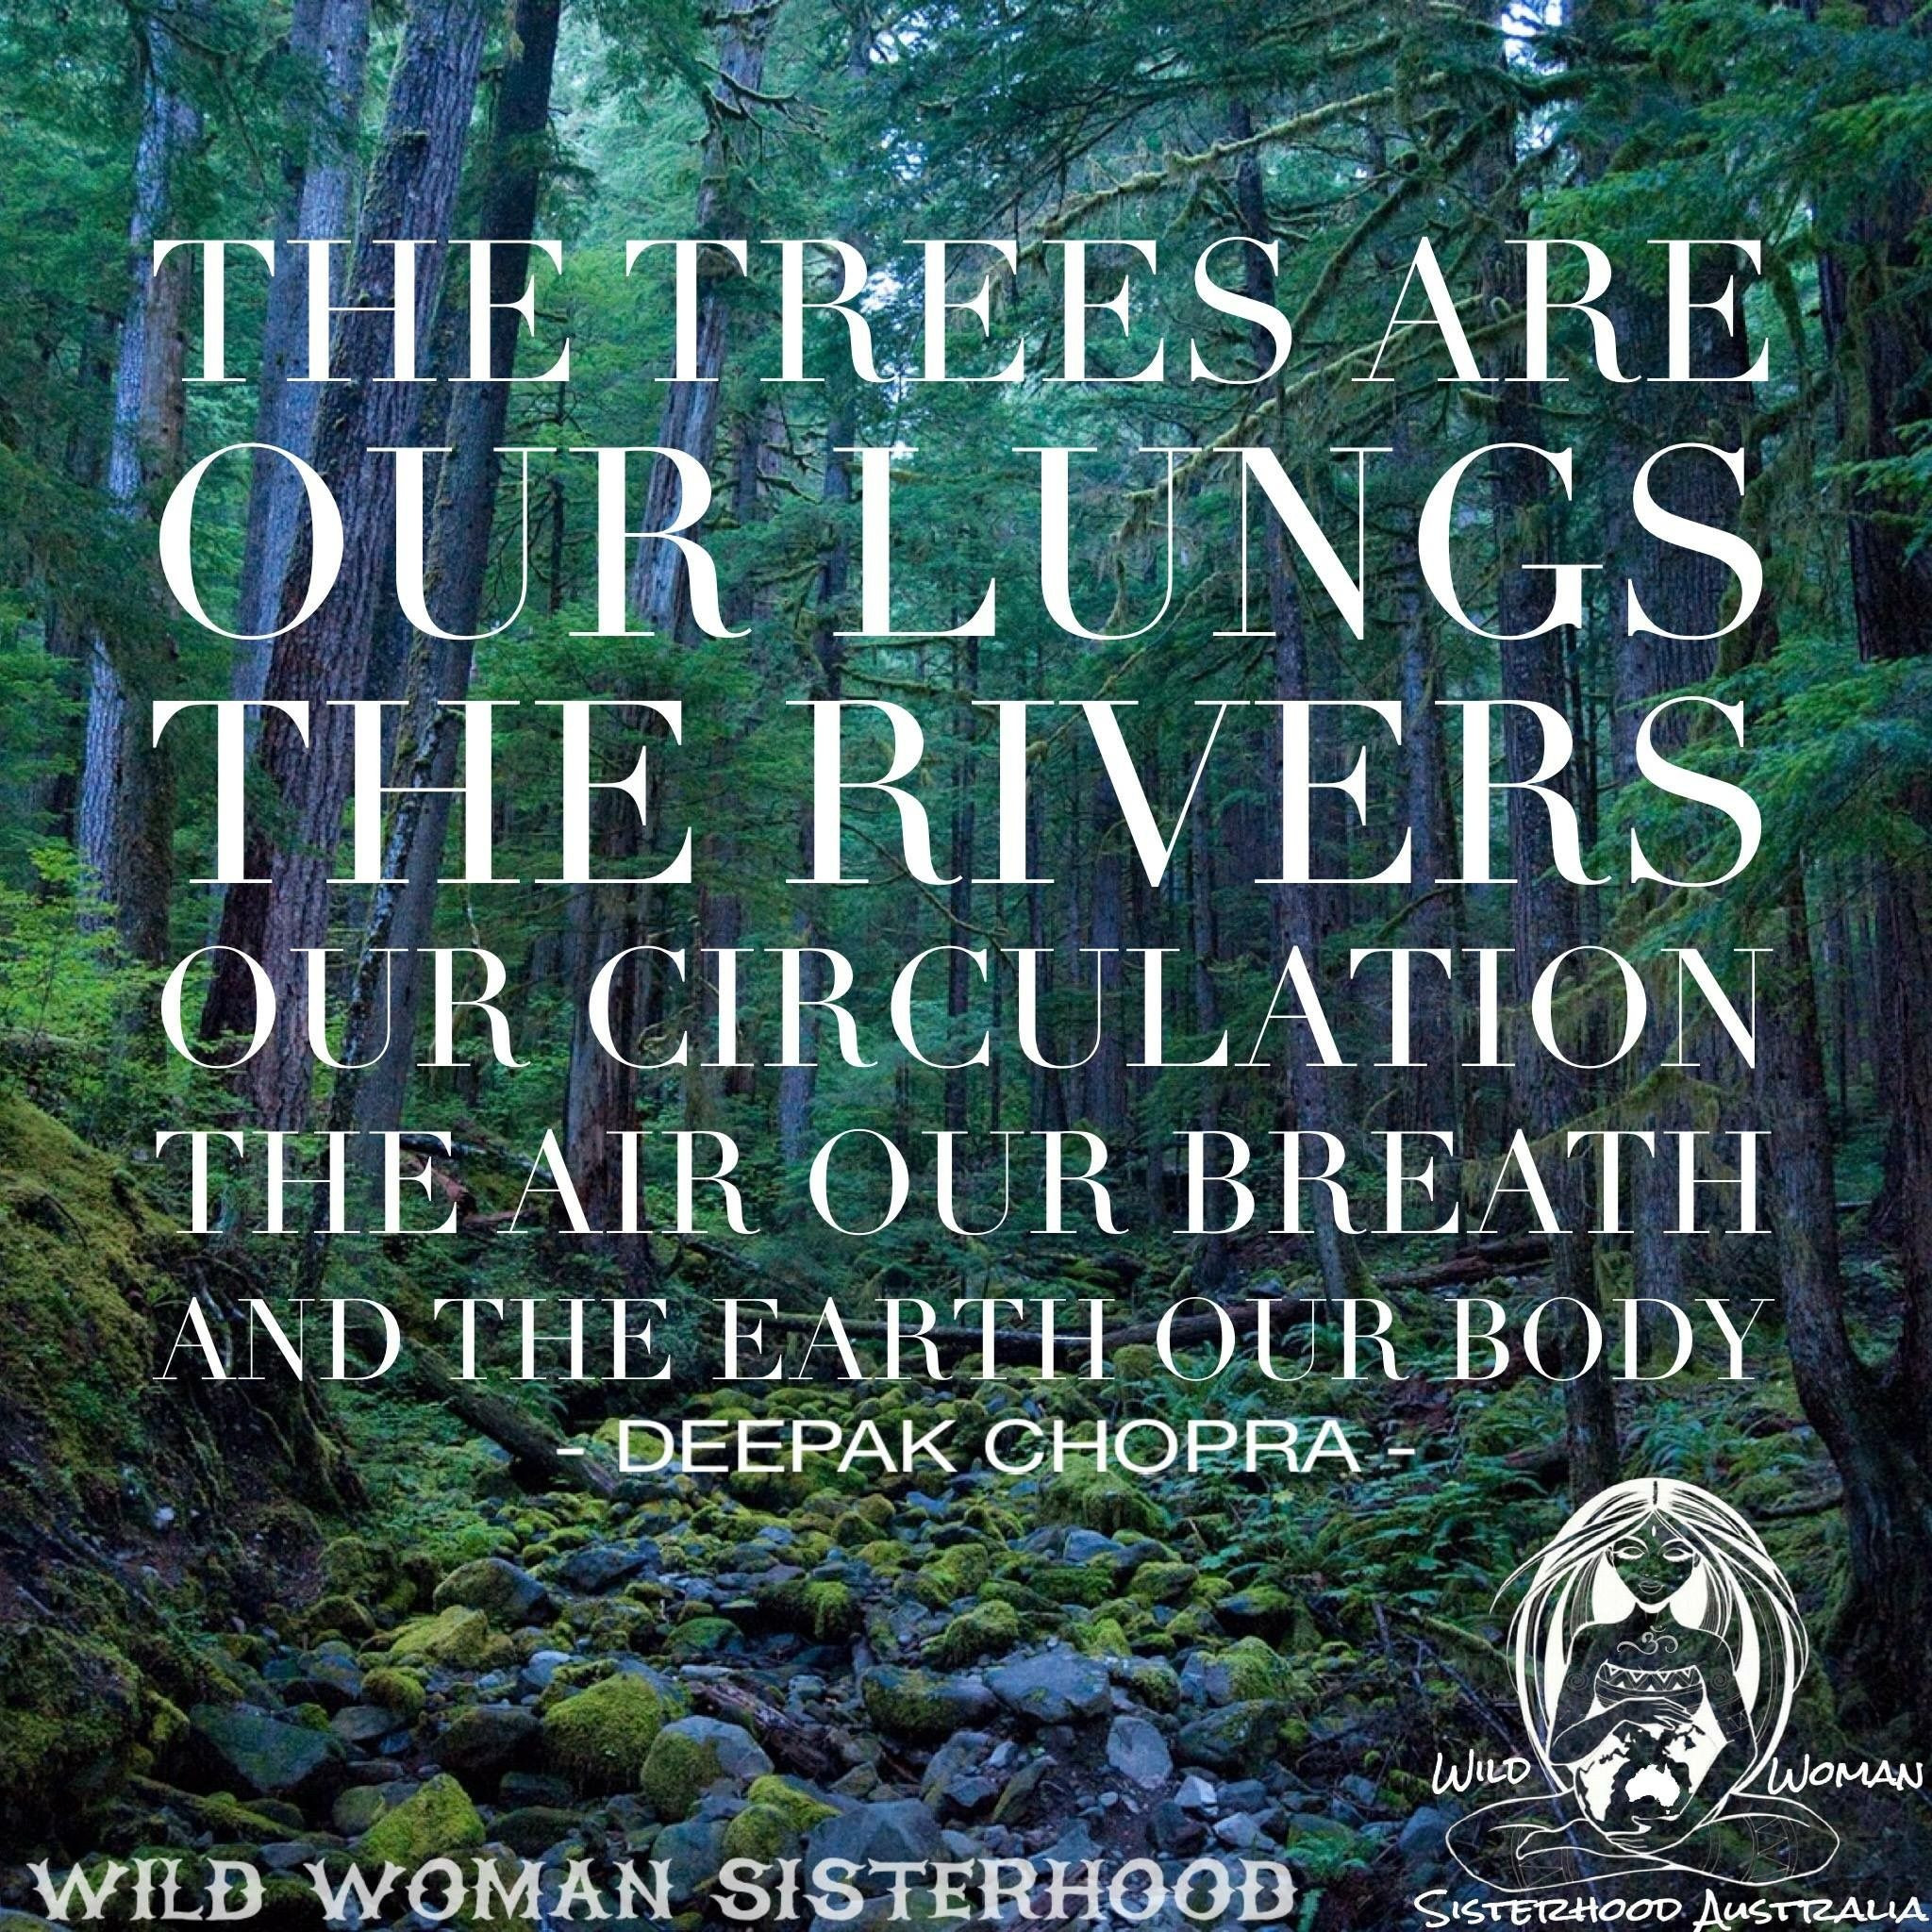 Quote About Mother Earth
 Pin by Michelle Mohr on Favorite posts